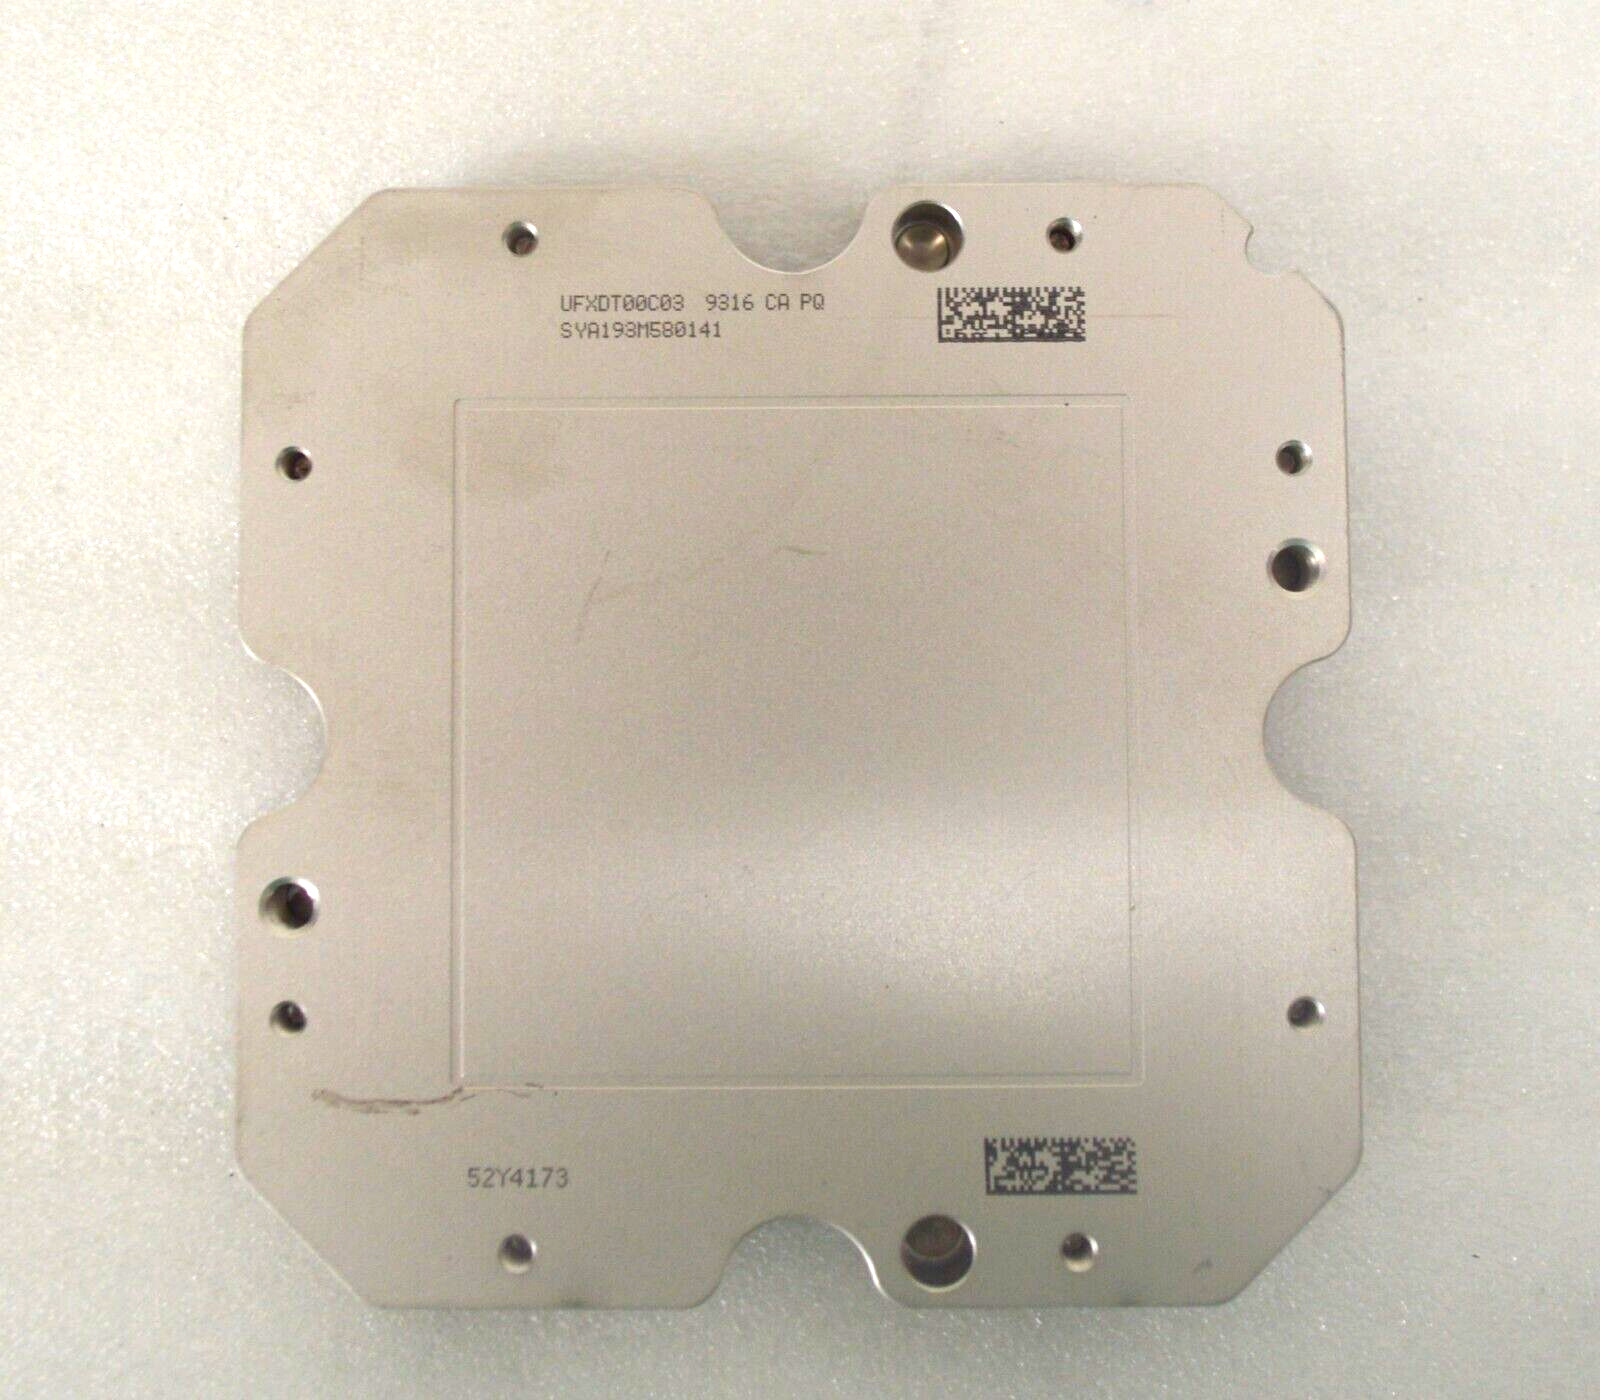 IBM Power7 3.3Ghz 8-Core CPU Processor 52Y4173 for Power 770